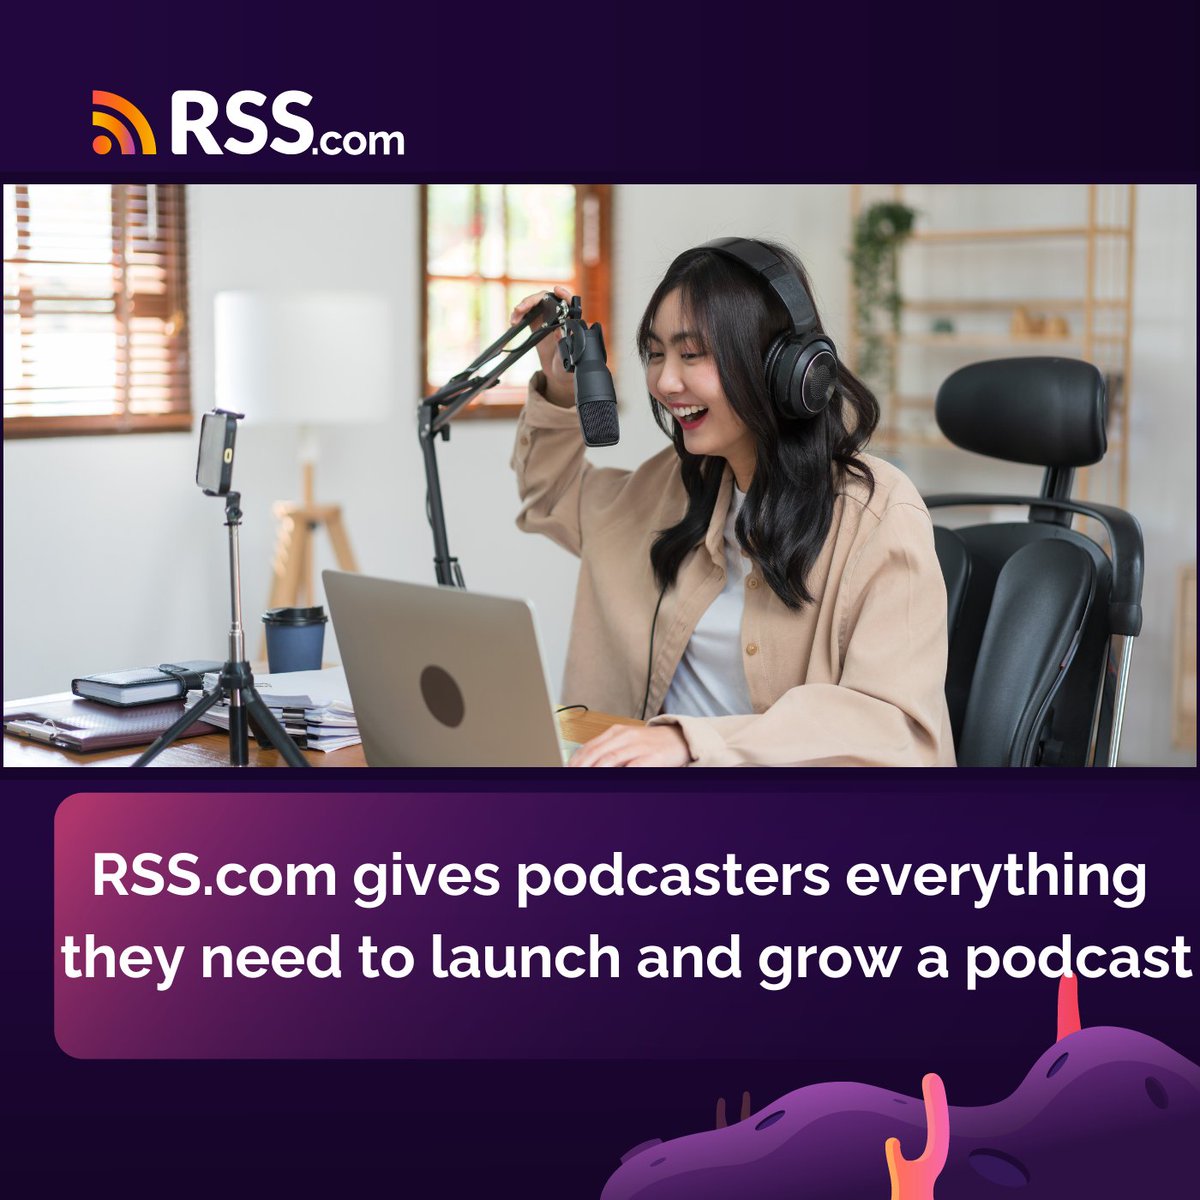 There are lots of podcast hosting companies, but not all are created equal. #Ontheblog we shared 10 ways to use RSS.com to grow your podcast. Check them out here: rss.com/blog/10-ways-t… #startapodcast